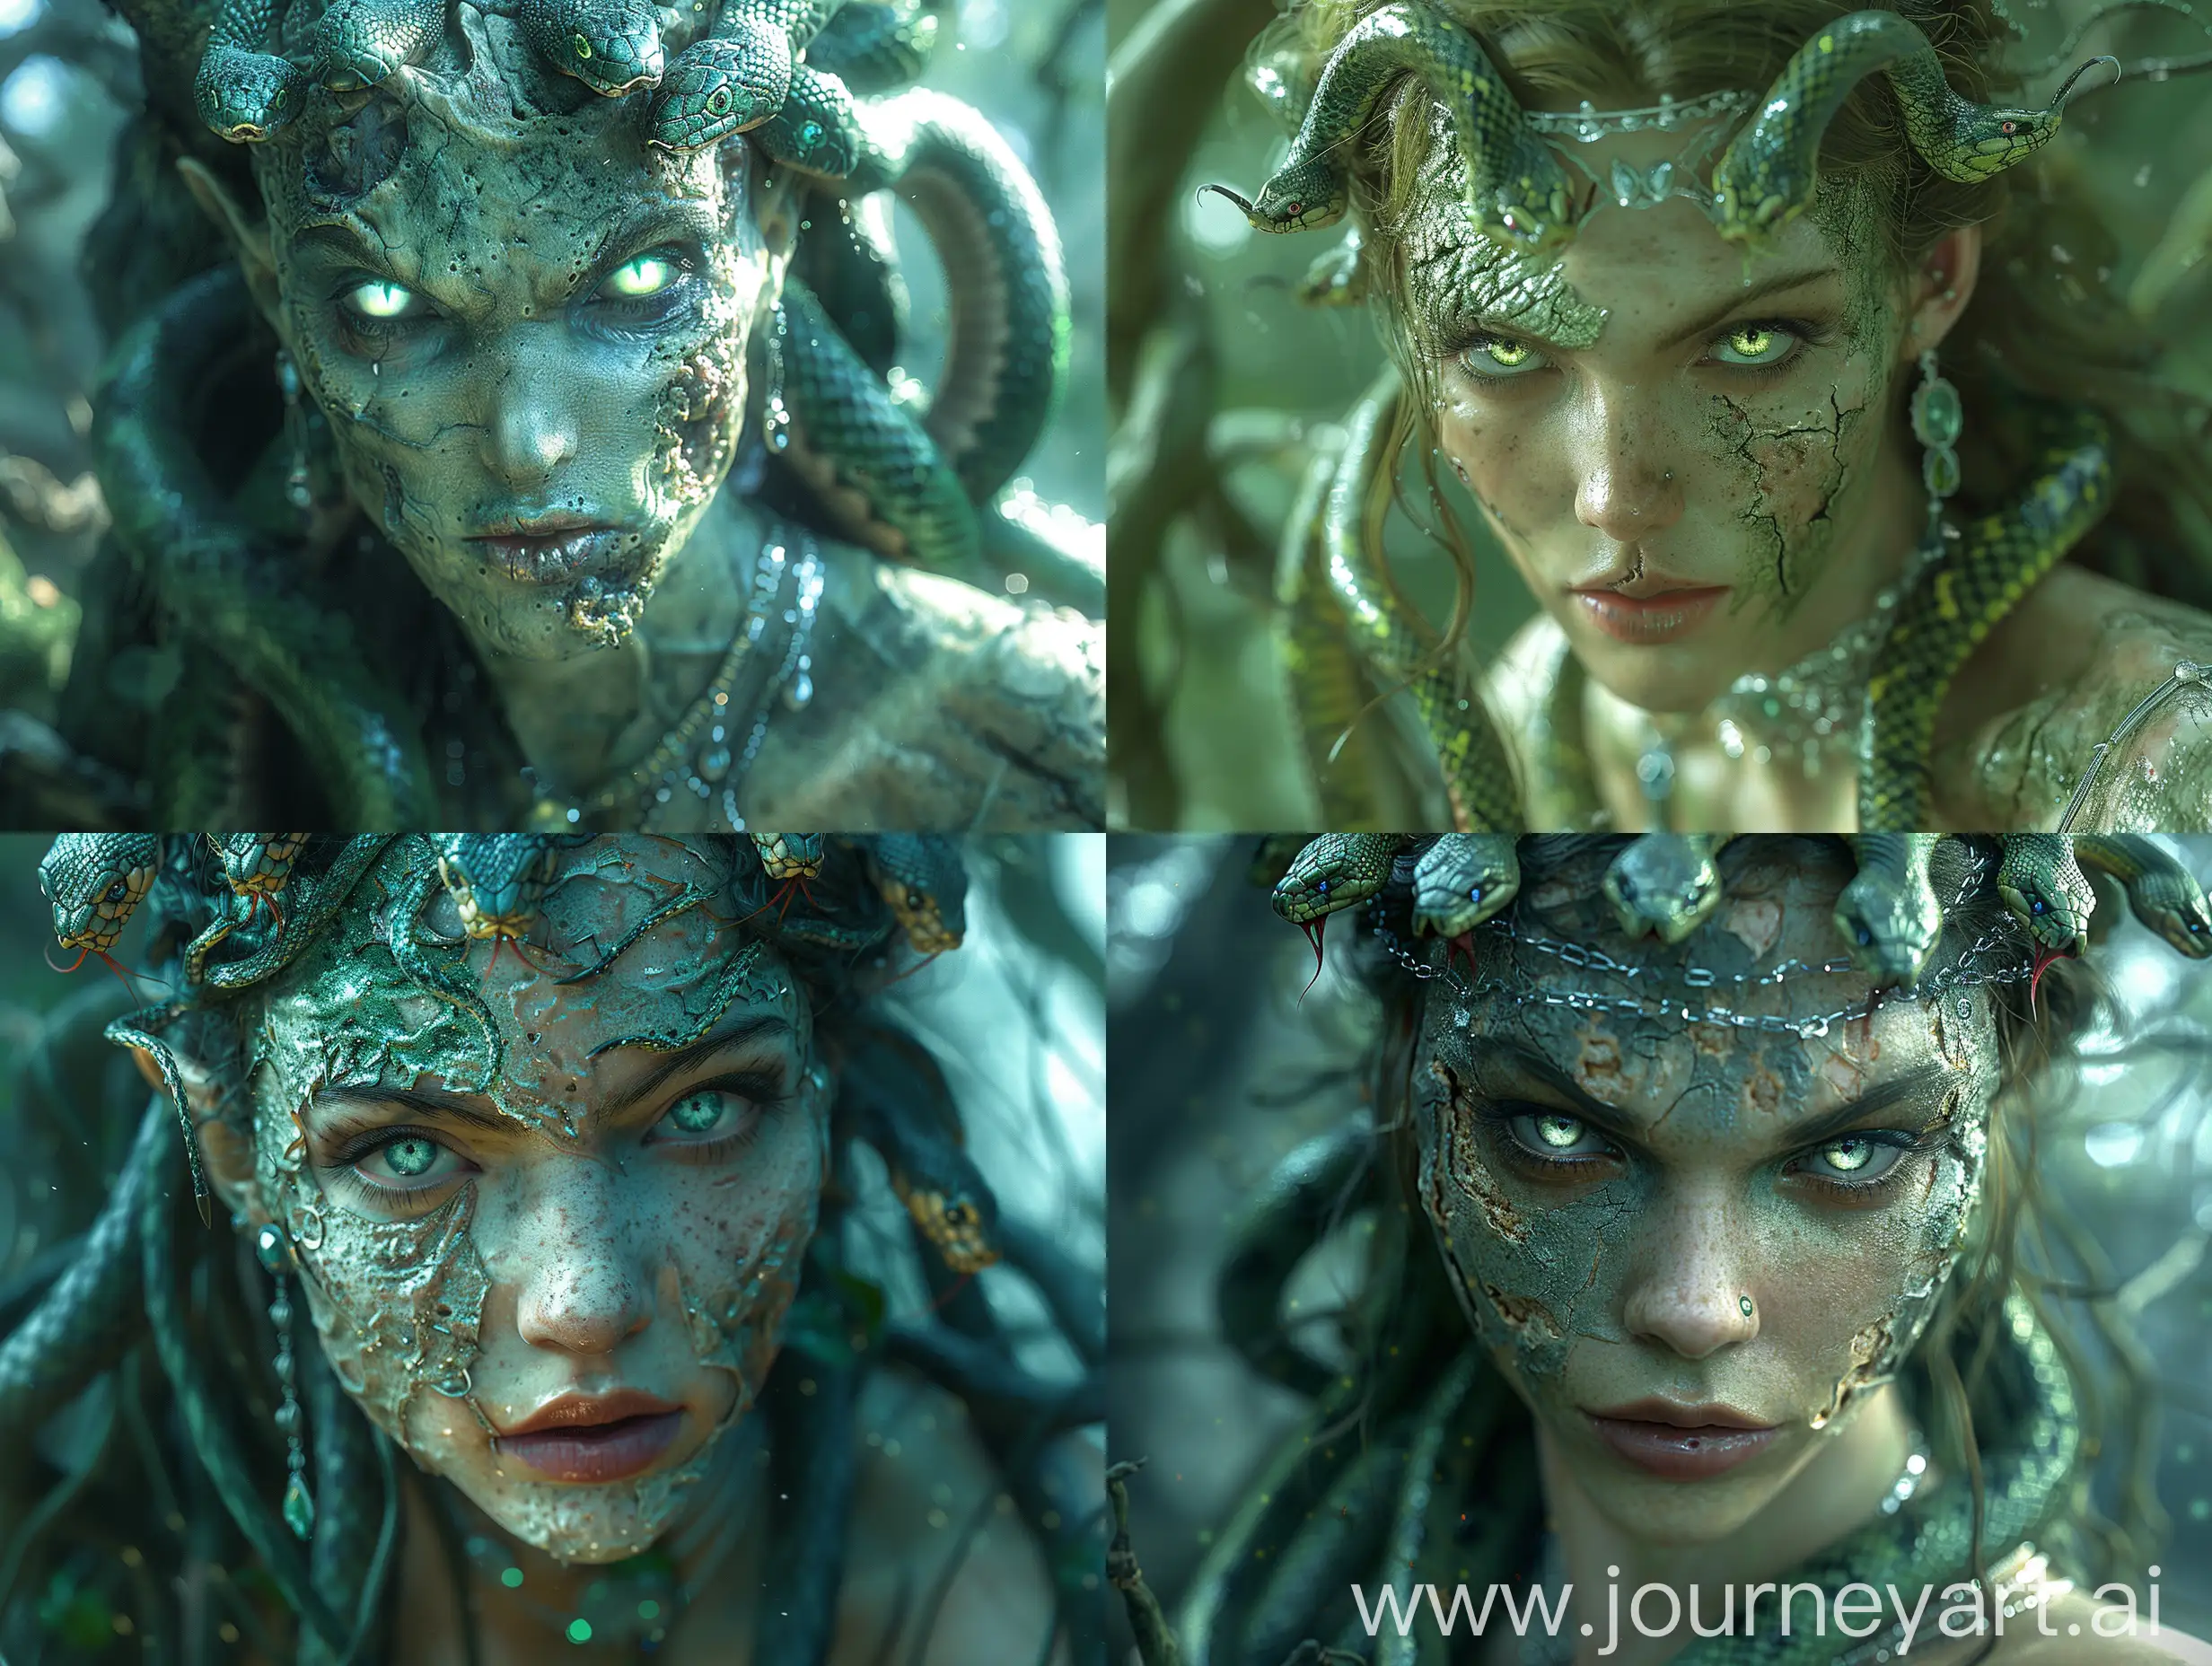 a photorealistic image of the evil witch medusa with snake heads on her head. She has glowing eyes, bad peeling green skin. She looks meanly into the camera. She wears silver jewelry with gemstones. She is in an enchanted forest. moonlight shines through the trees. very detailed --s 1000